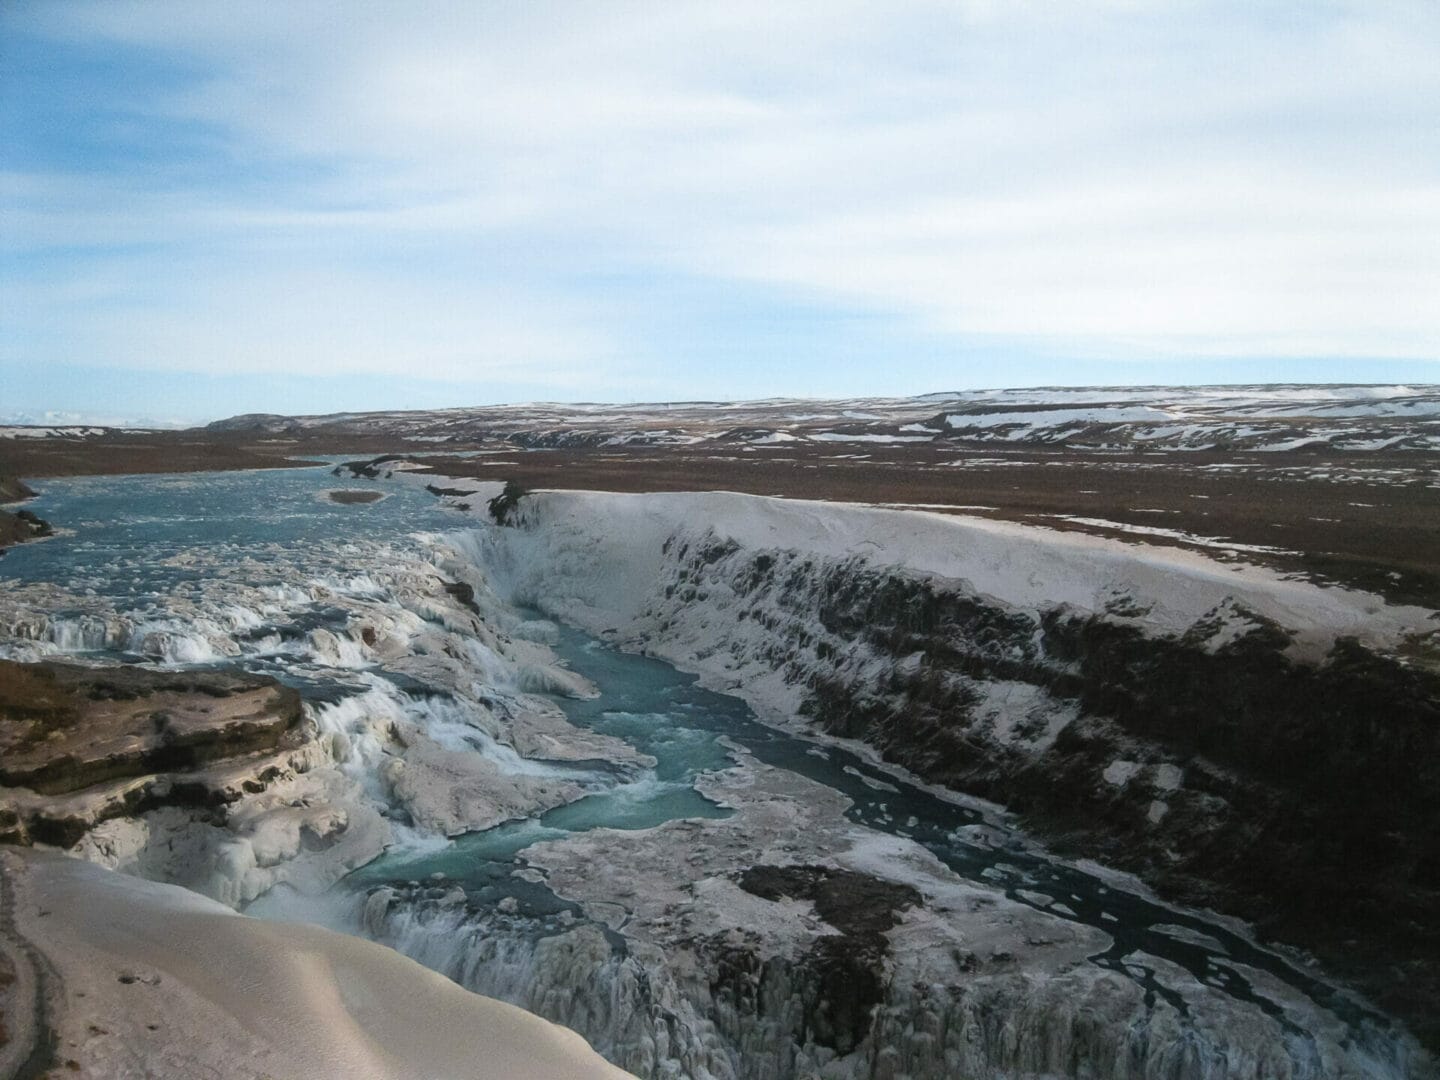 3 Days in Iceland - Gullfoss on the Golden Circle